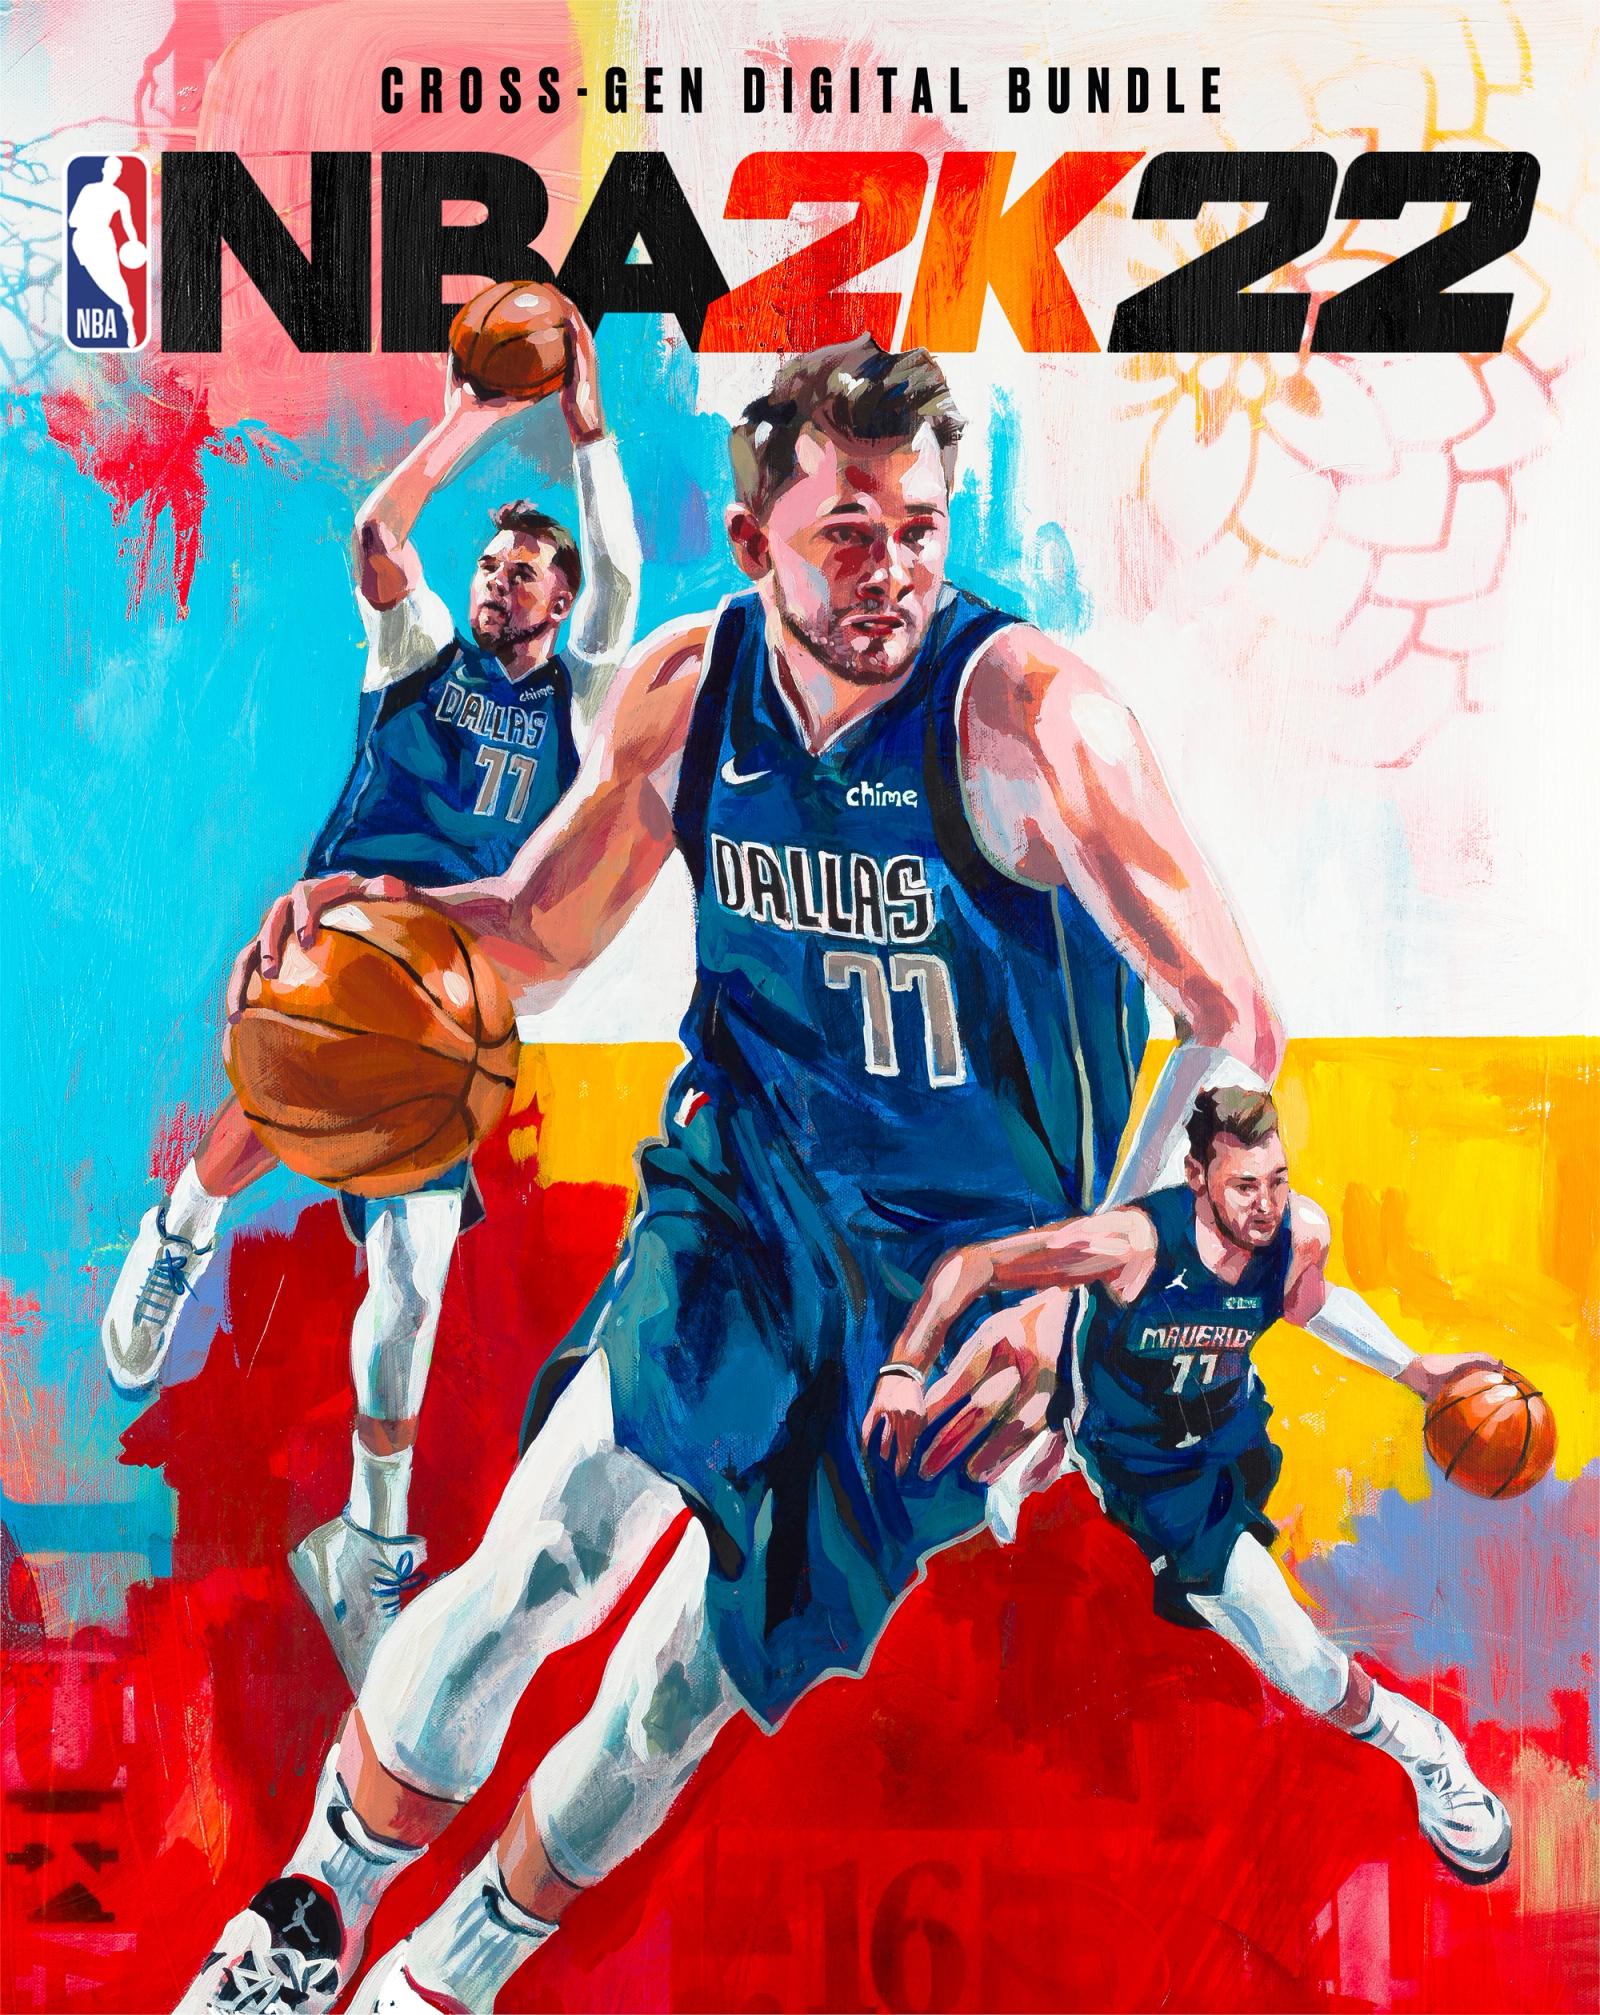 Luka Doncic of the Dallas Mavericks is the cover athlete of NBA 2K22